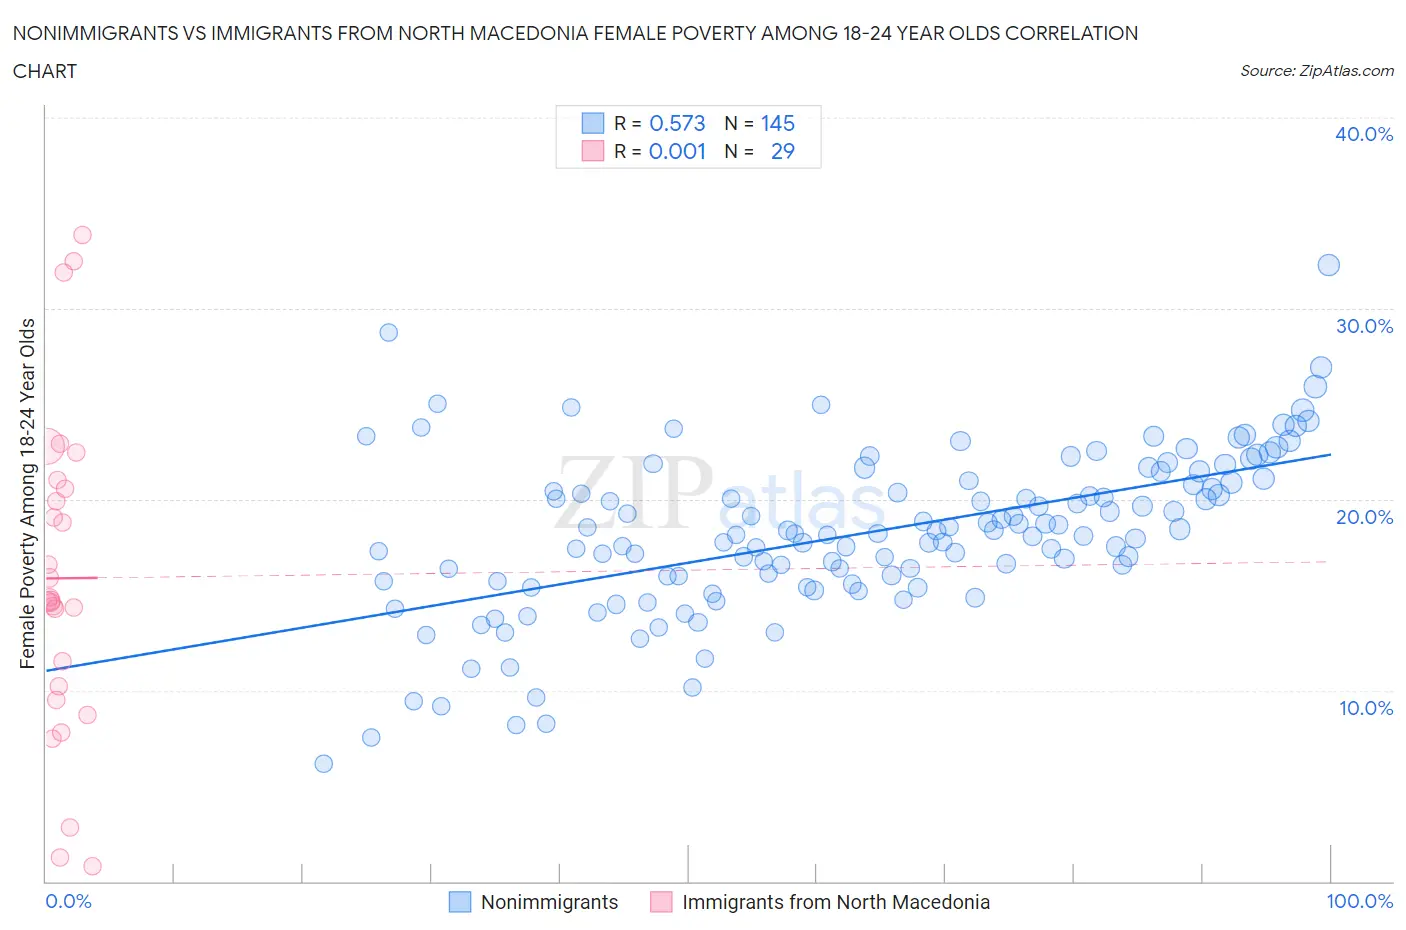 Nonimmigrants vs Immigrants from North Macedonia Female Poverty Among 18-24 Year Olds